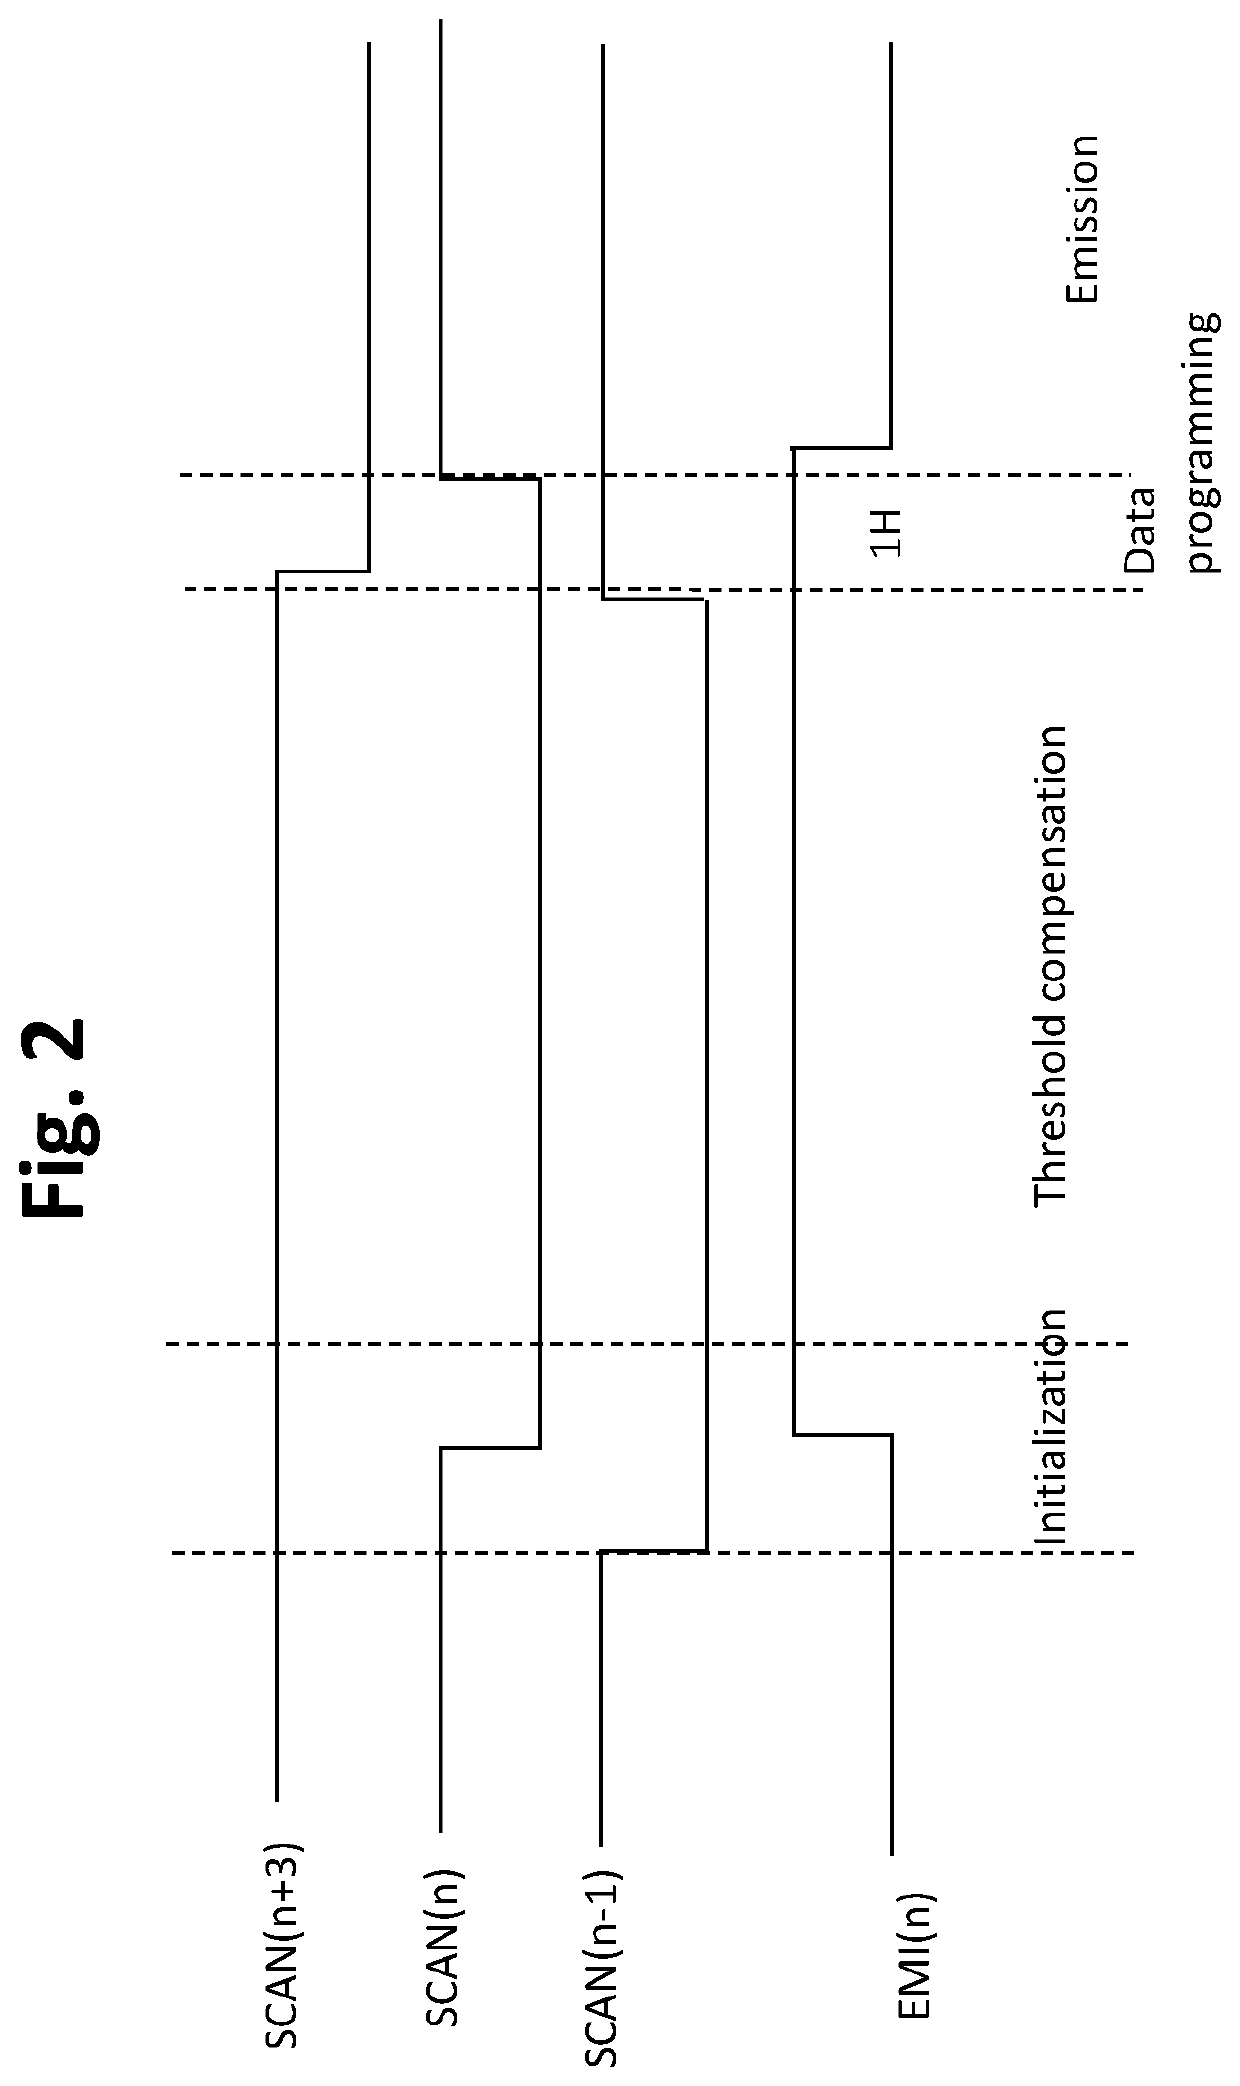 TFT pixel threshold voltage compensation circuit with short one horizontal time